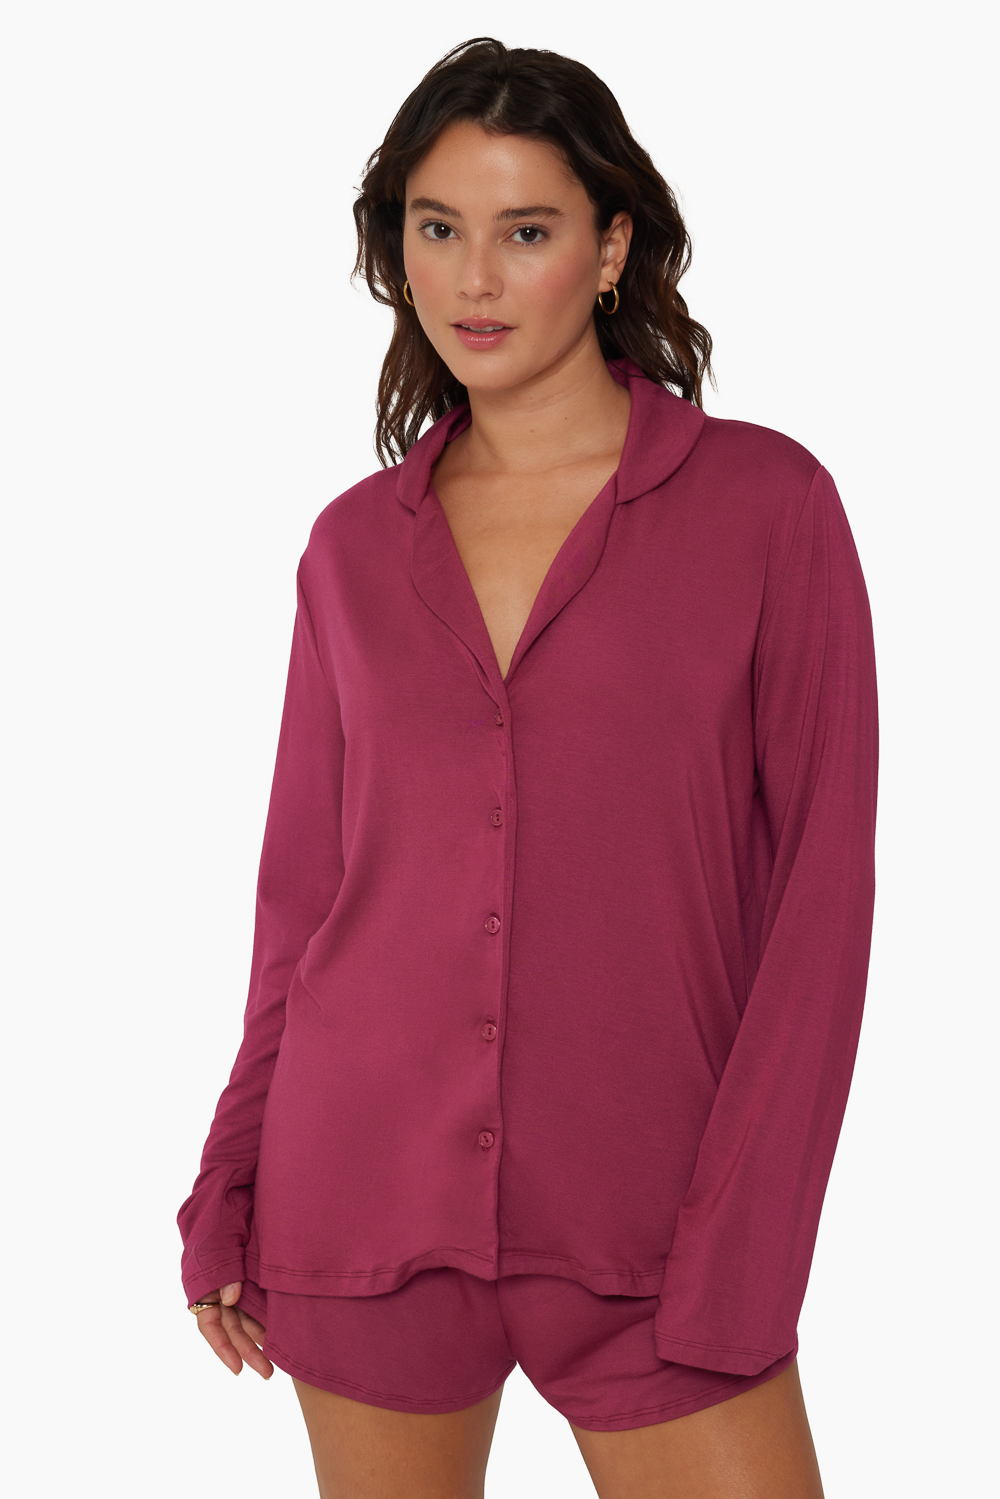 SET™ SLEEP BUTTON DOWN IN ORCHID